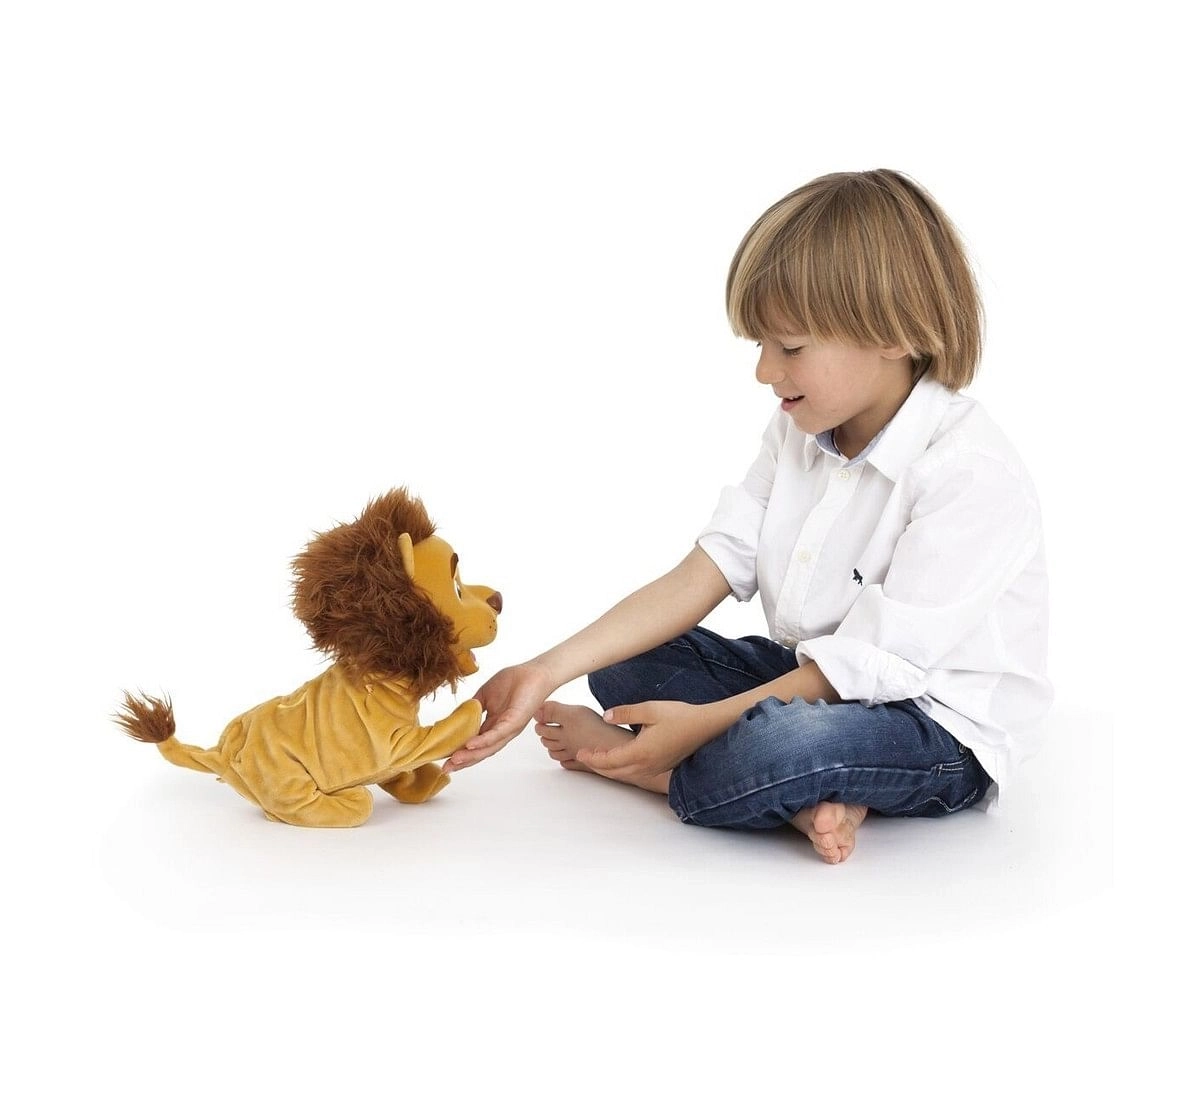 Imc Kokum The Little Lion Interactive Soft Toys for Kids age 3Y+ - 16 Cm (Brown)